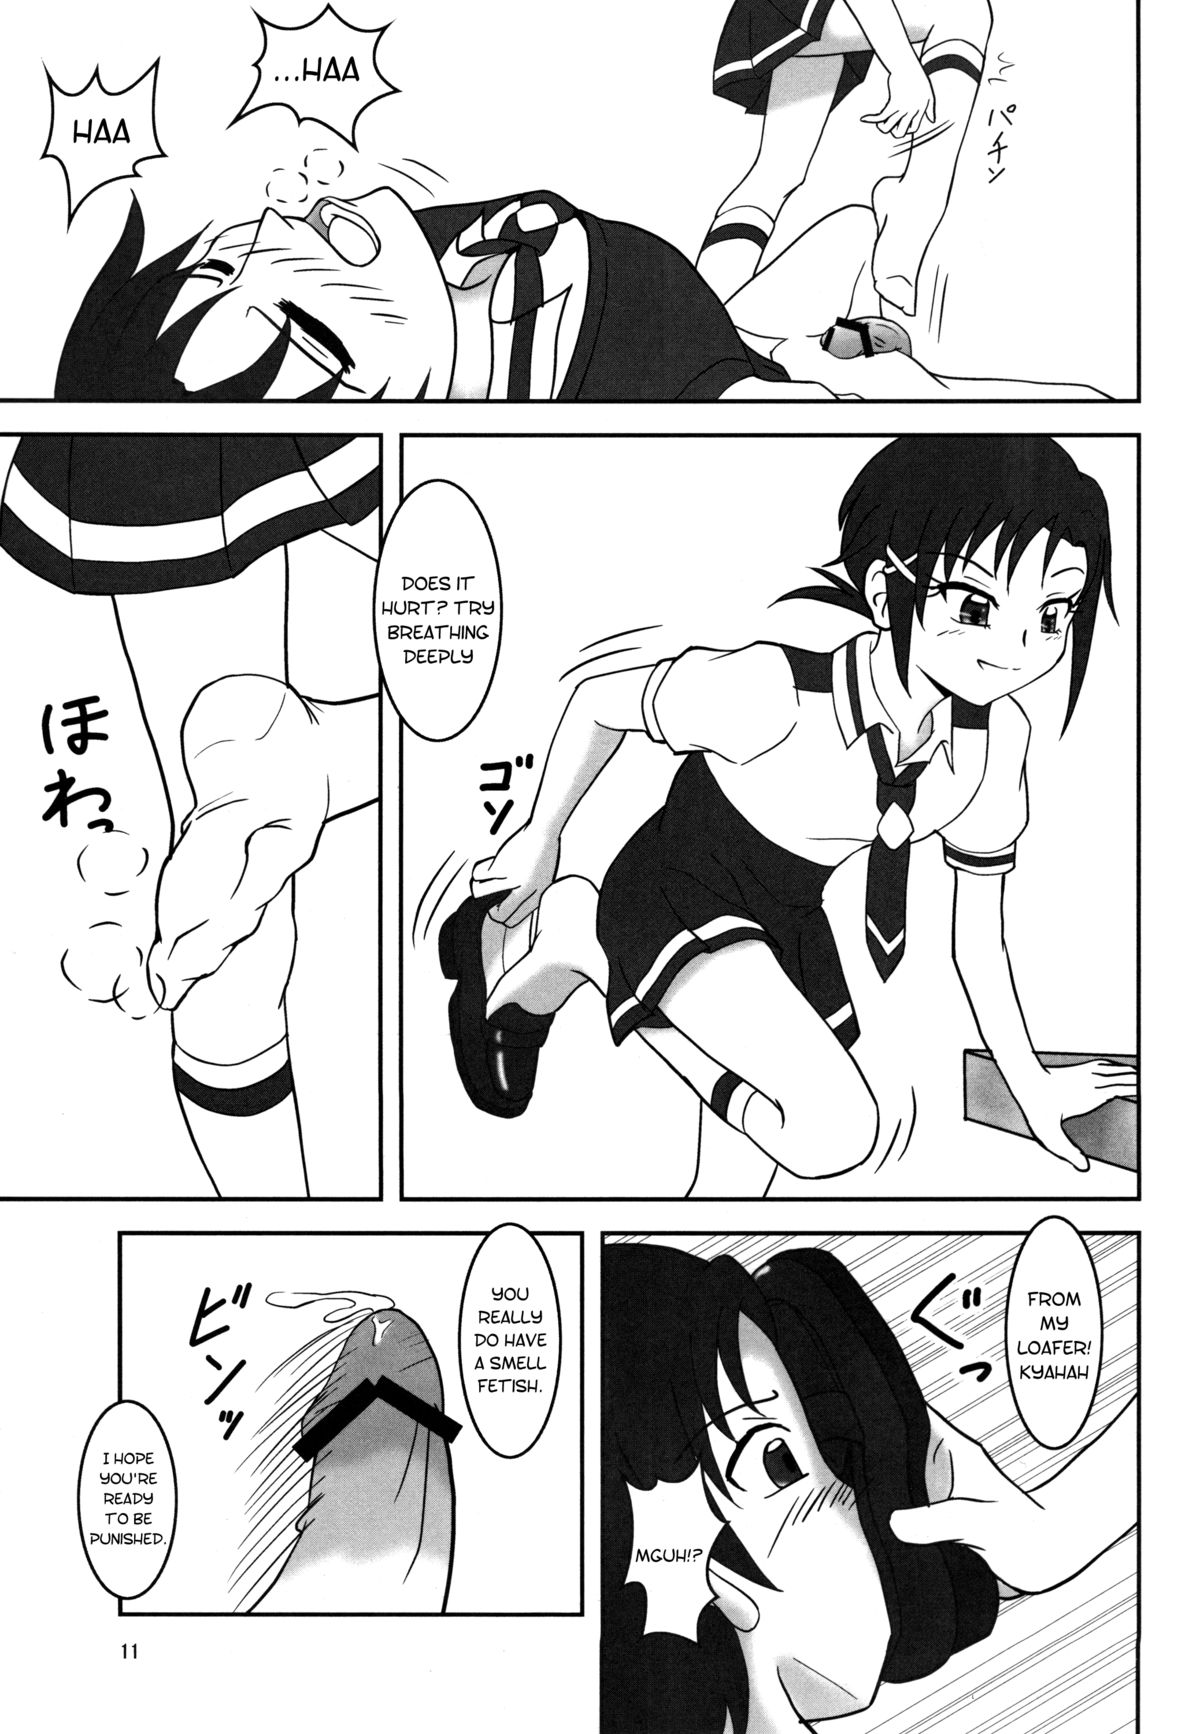 (C82) [AFJ (Ashi_O)] Smell Zuricure | Smell Footycure (Smile Precure!) [English] page 12 full